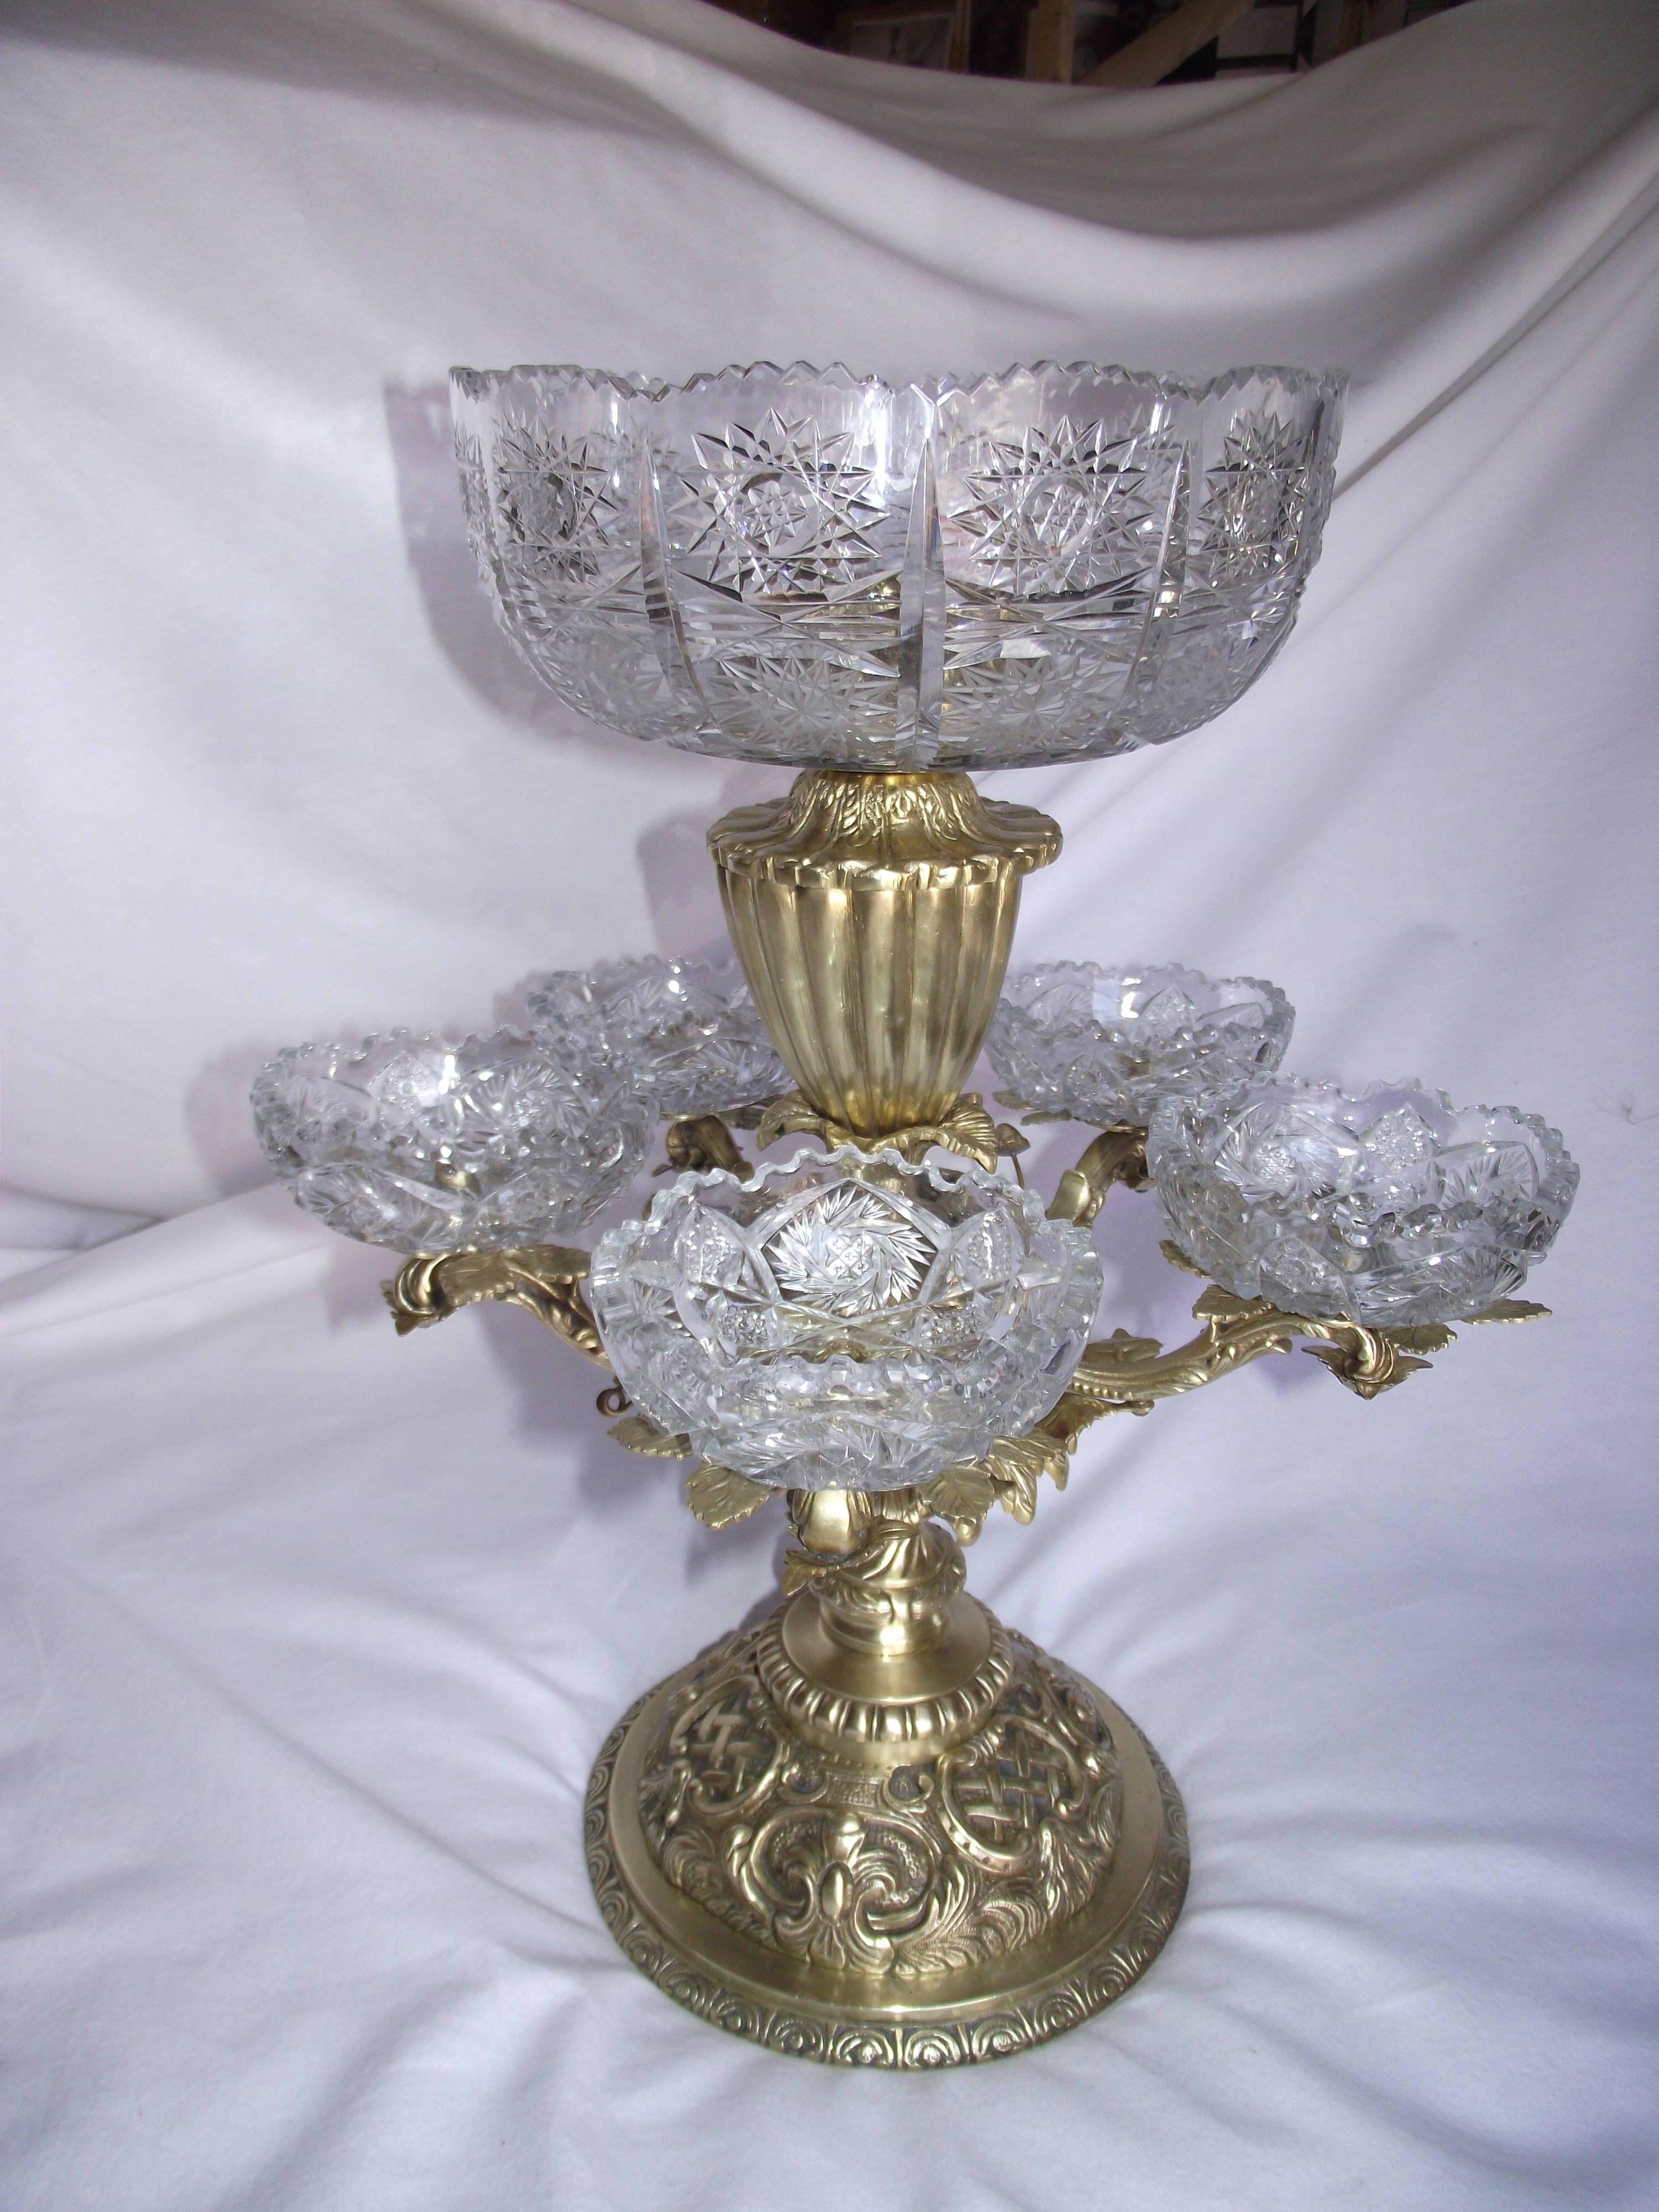 Unknown Victorian Epergne Centrepiece, Brass and Glass Centrepiece for Fruit or Flowers